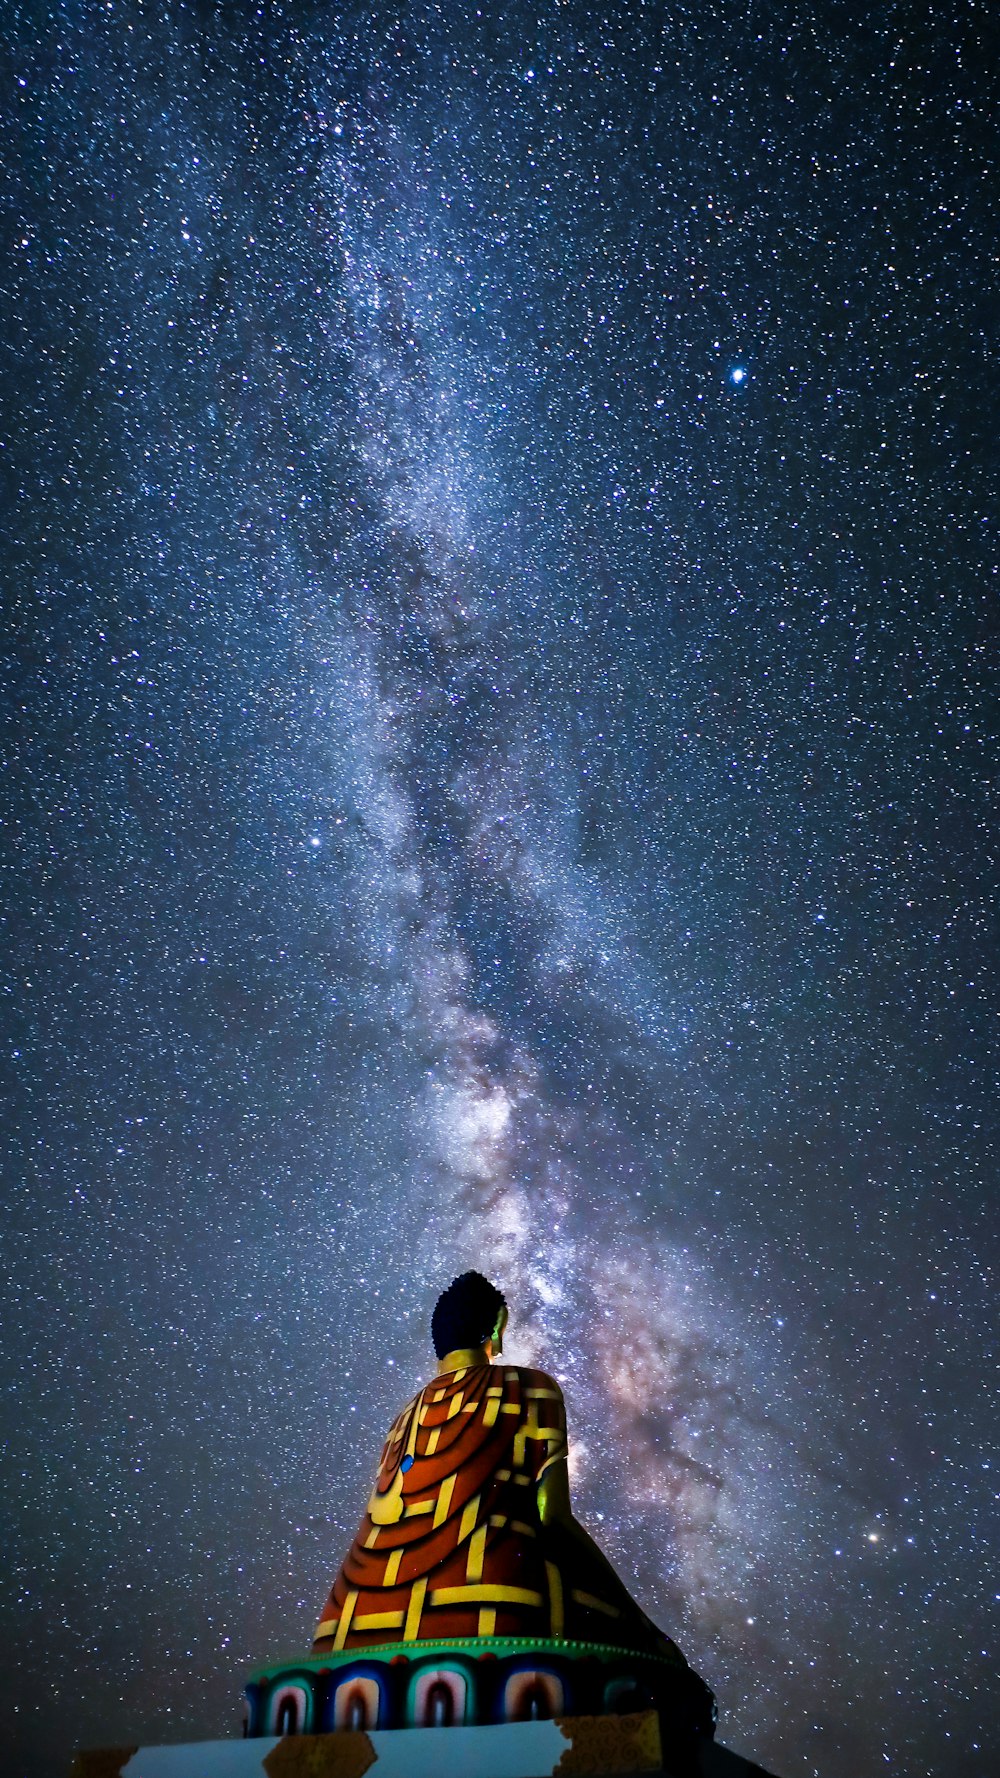 a man sitting on top of a bench under a night sky filled with stars